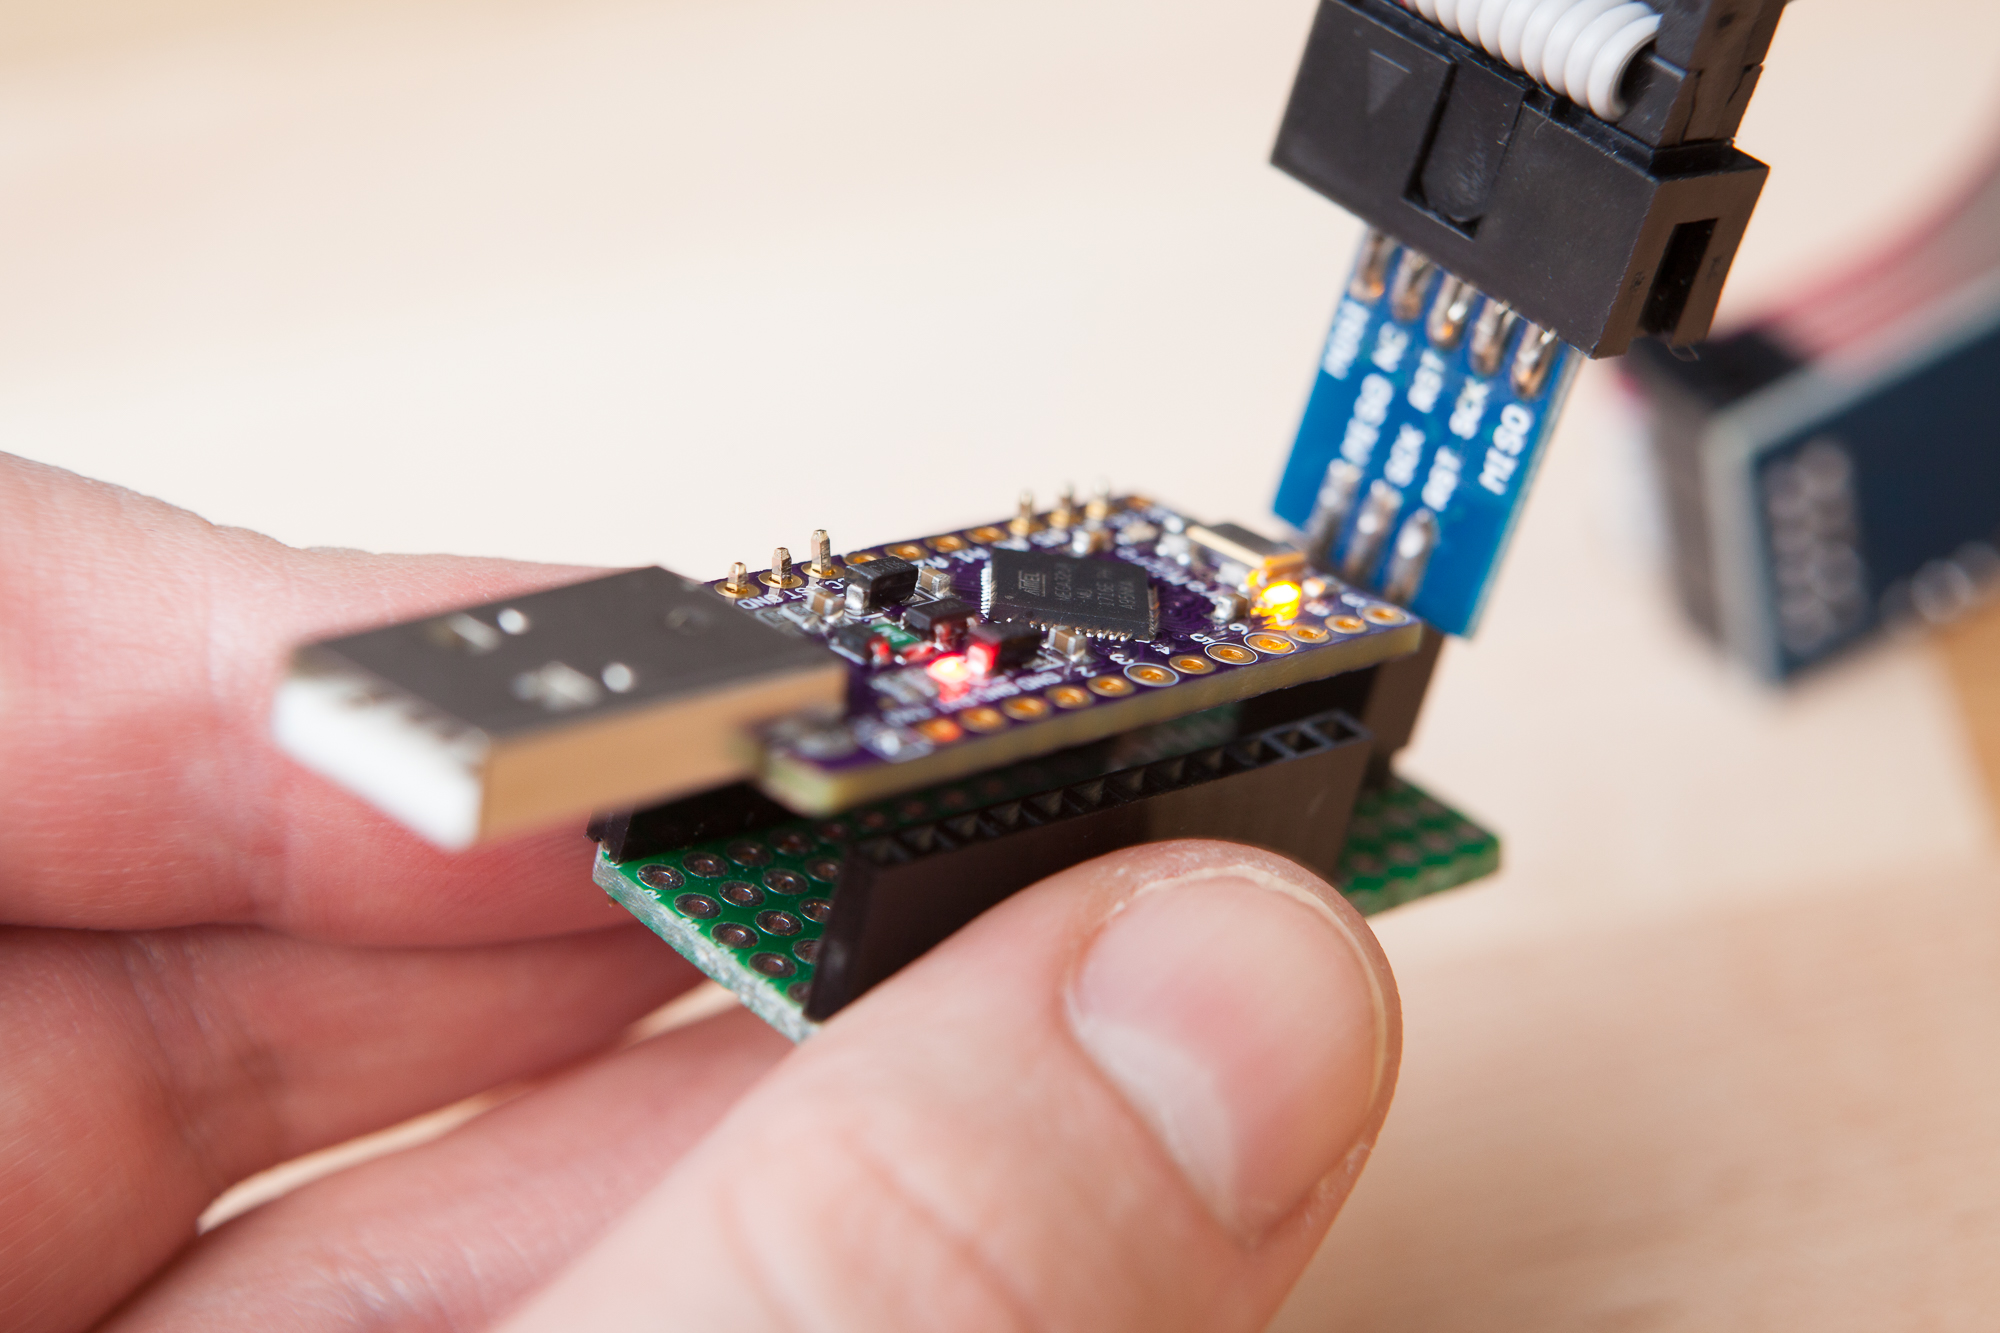 Getting started with the Pro Micro Arduino Board